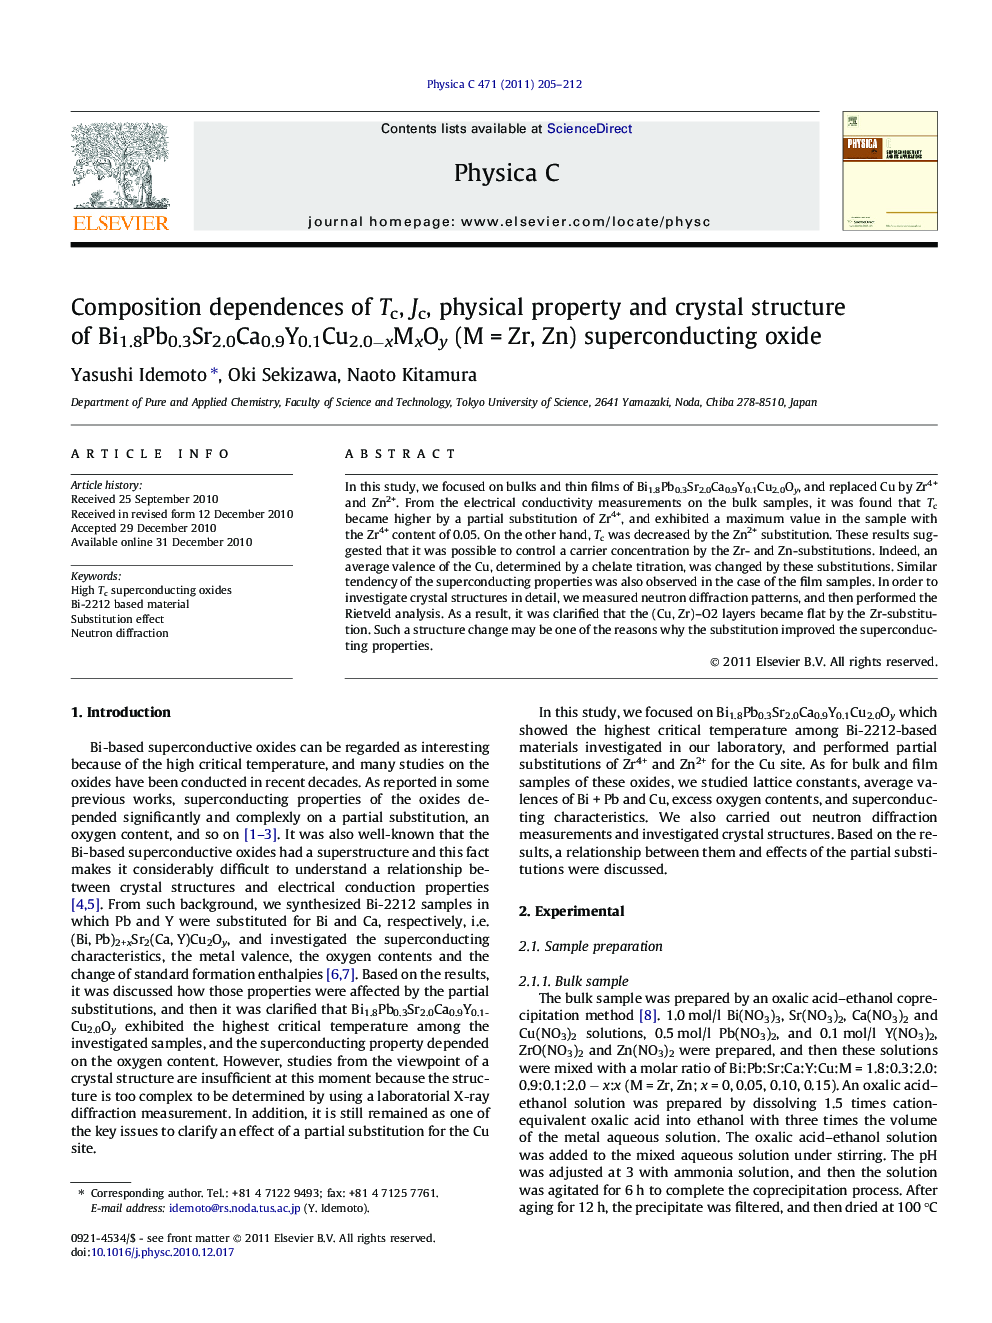 Composition dependences of Tc, Jc, physical property and crystal structure of Bi1.8Pb0.3Sr2.0Ca0.9Y0.1Cu2.0âxMxOy (MÂ =Â Zr, Zn) superconducting oxide